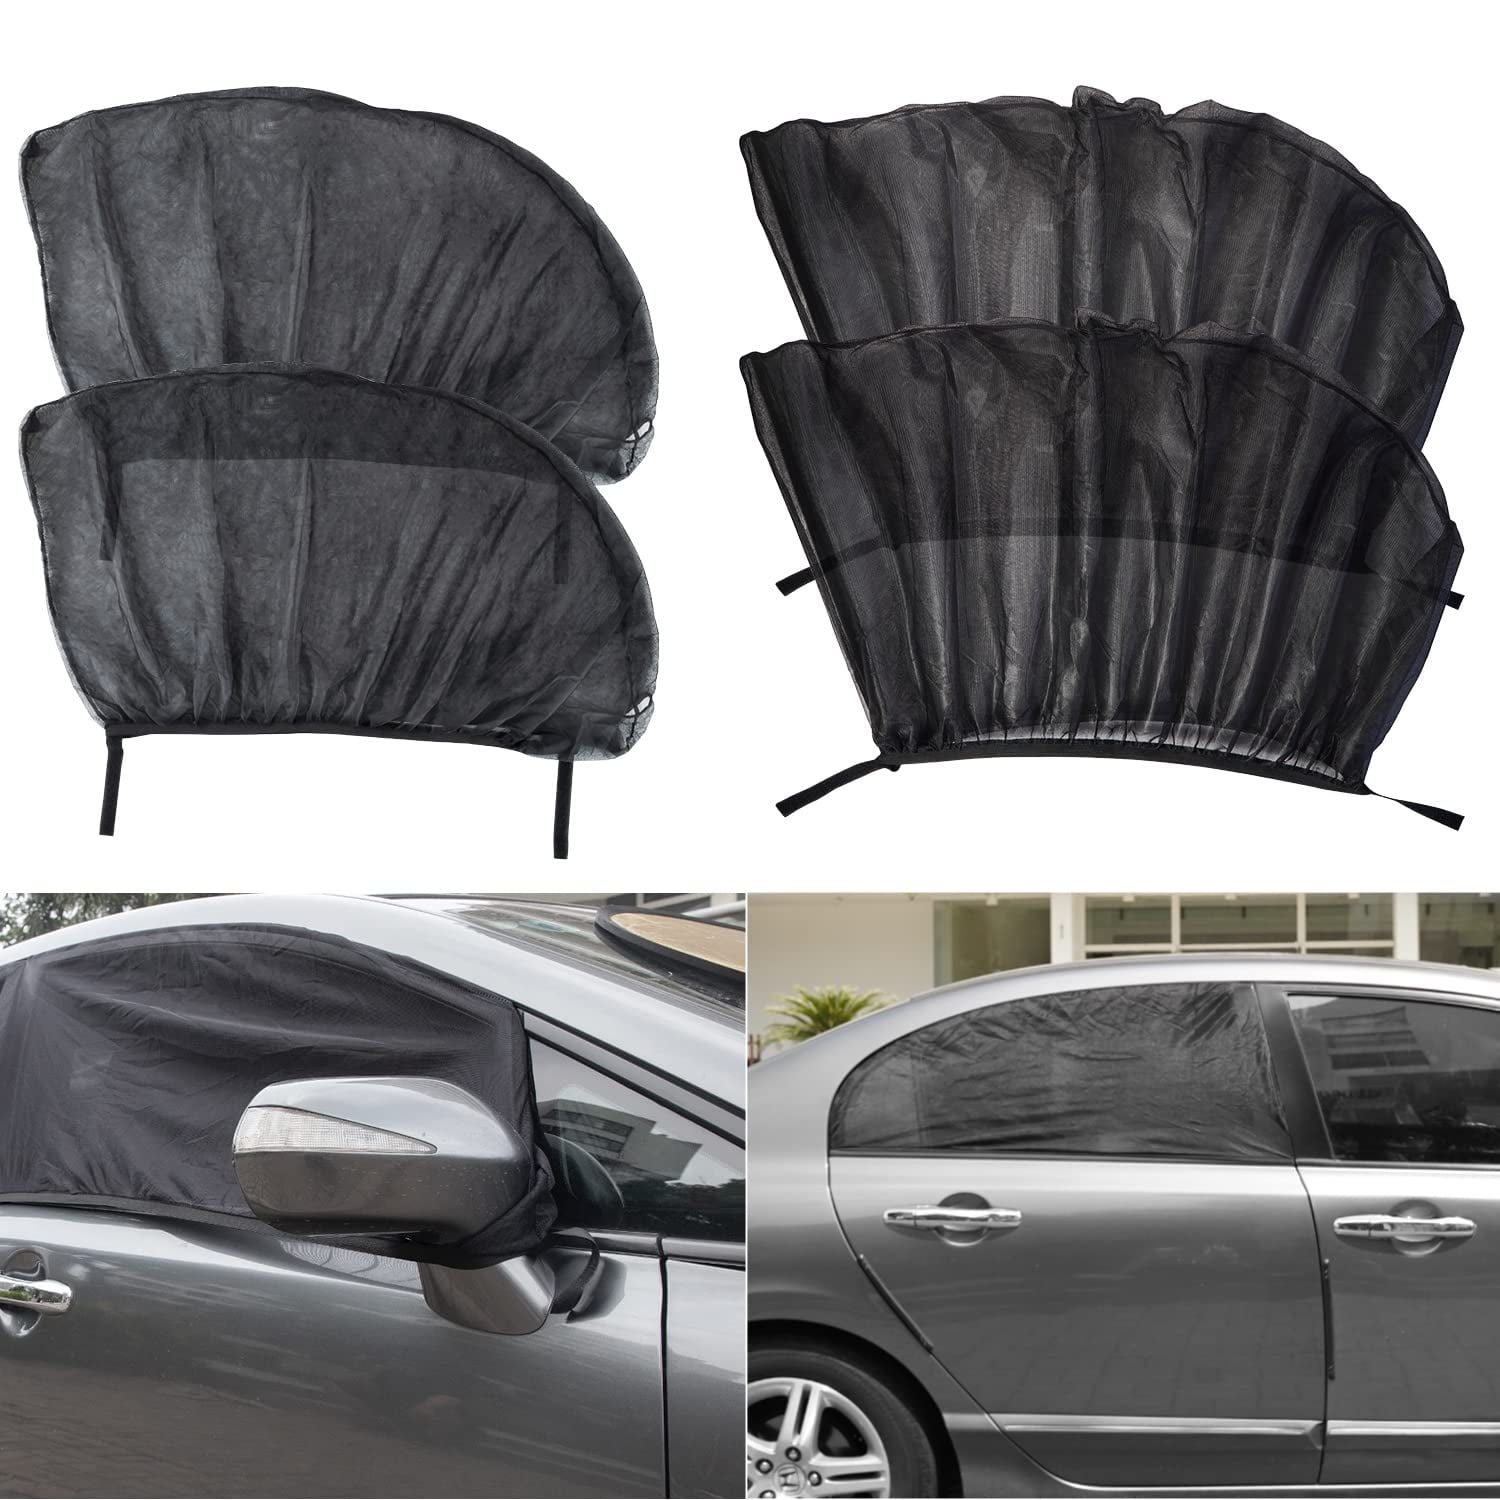 Auto Drive Universal Fit on Windshield Silver Accordion Sunshade 1 Pack  AD021701B-1, 63'' x 28.5